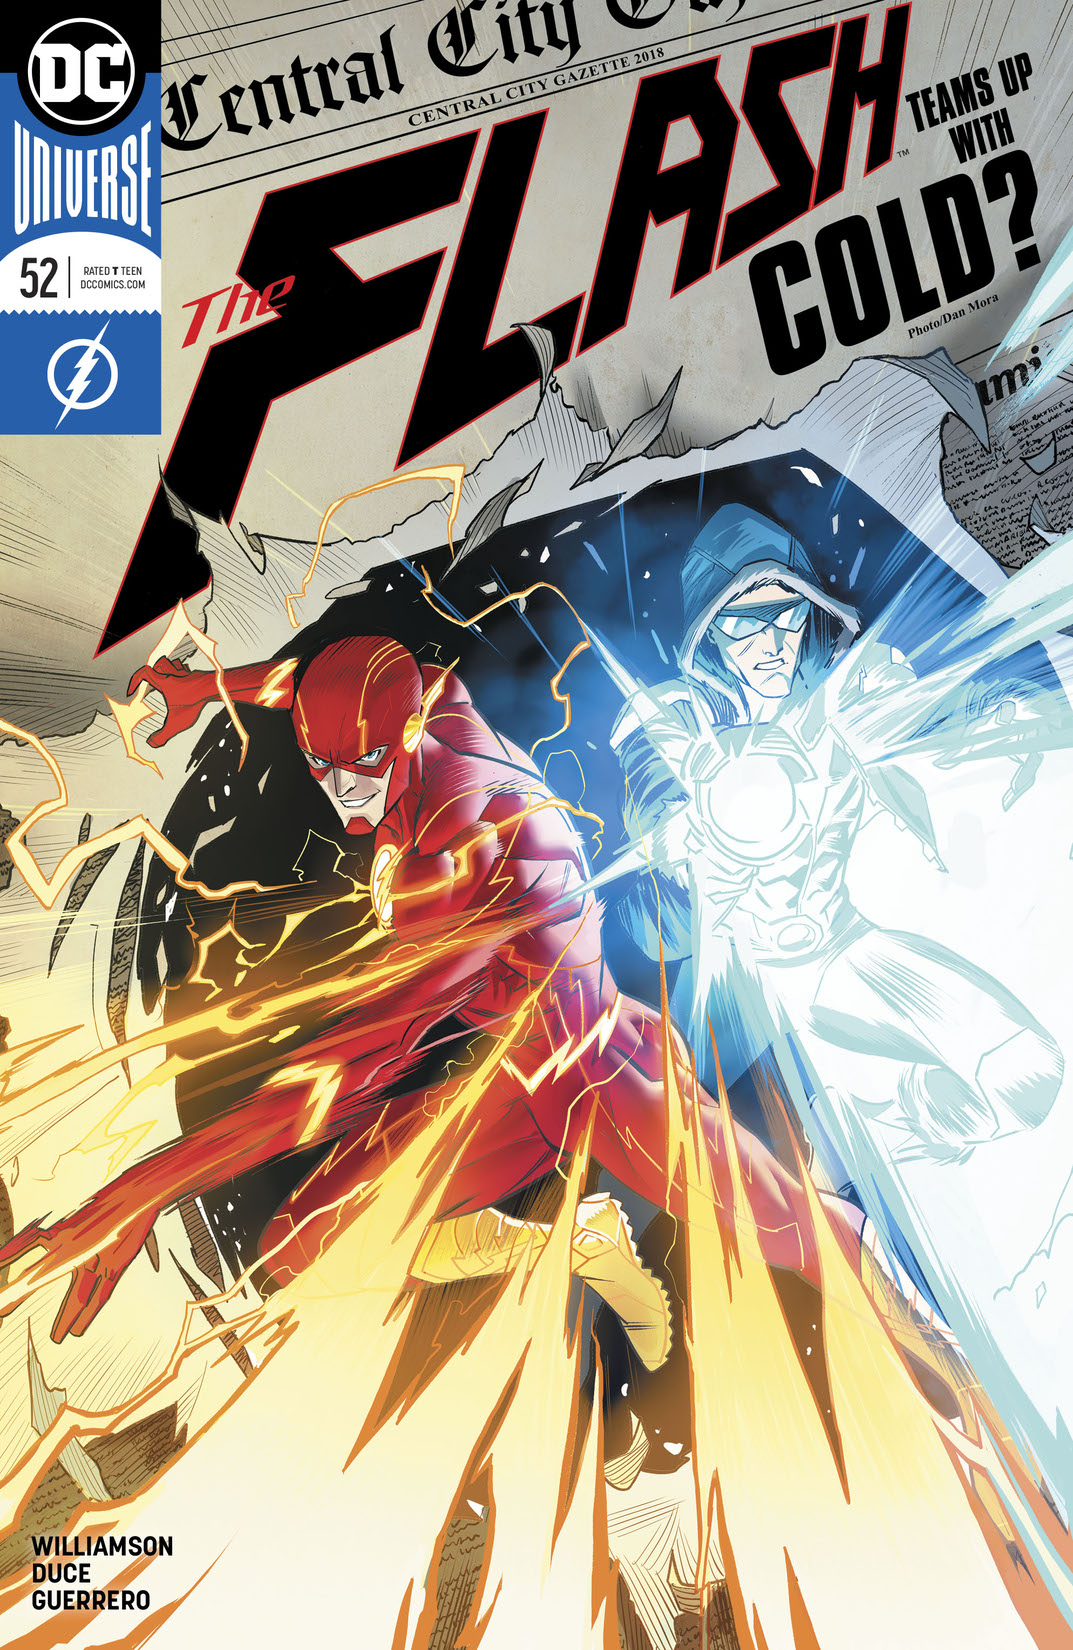 The Flash (2016-) #52 preview images